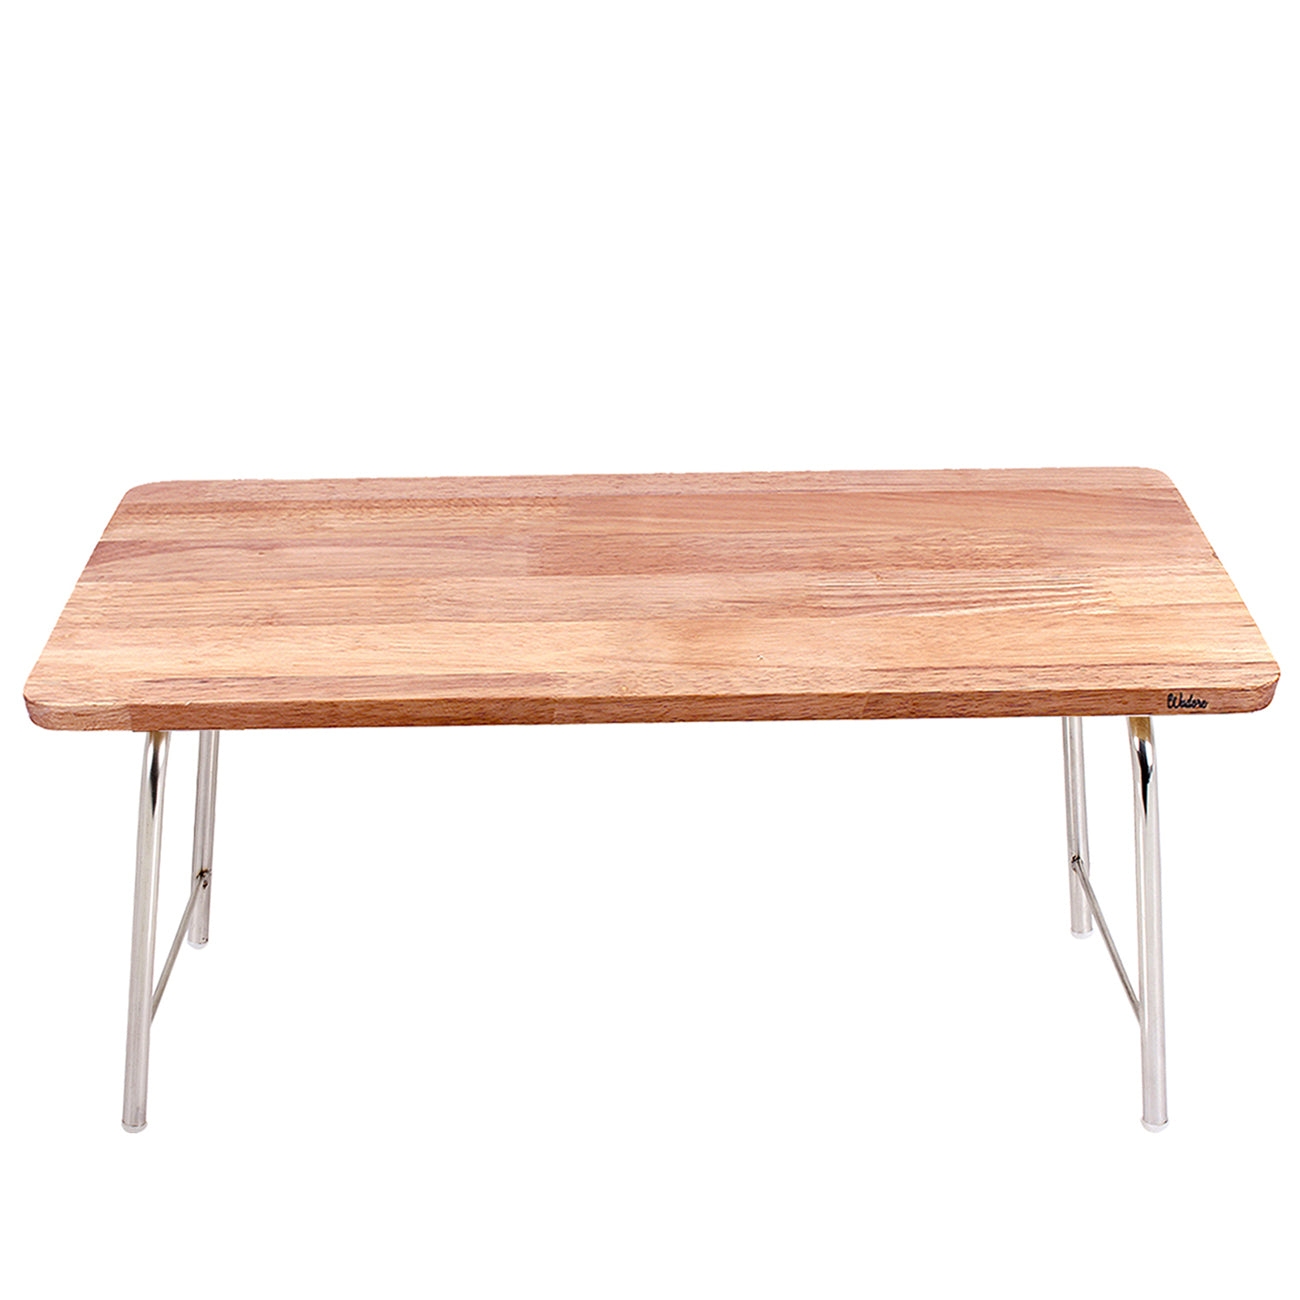 Laptop Table With Folding Steel Legs - Natural wood | Wudore